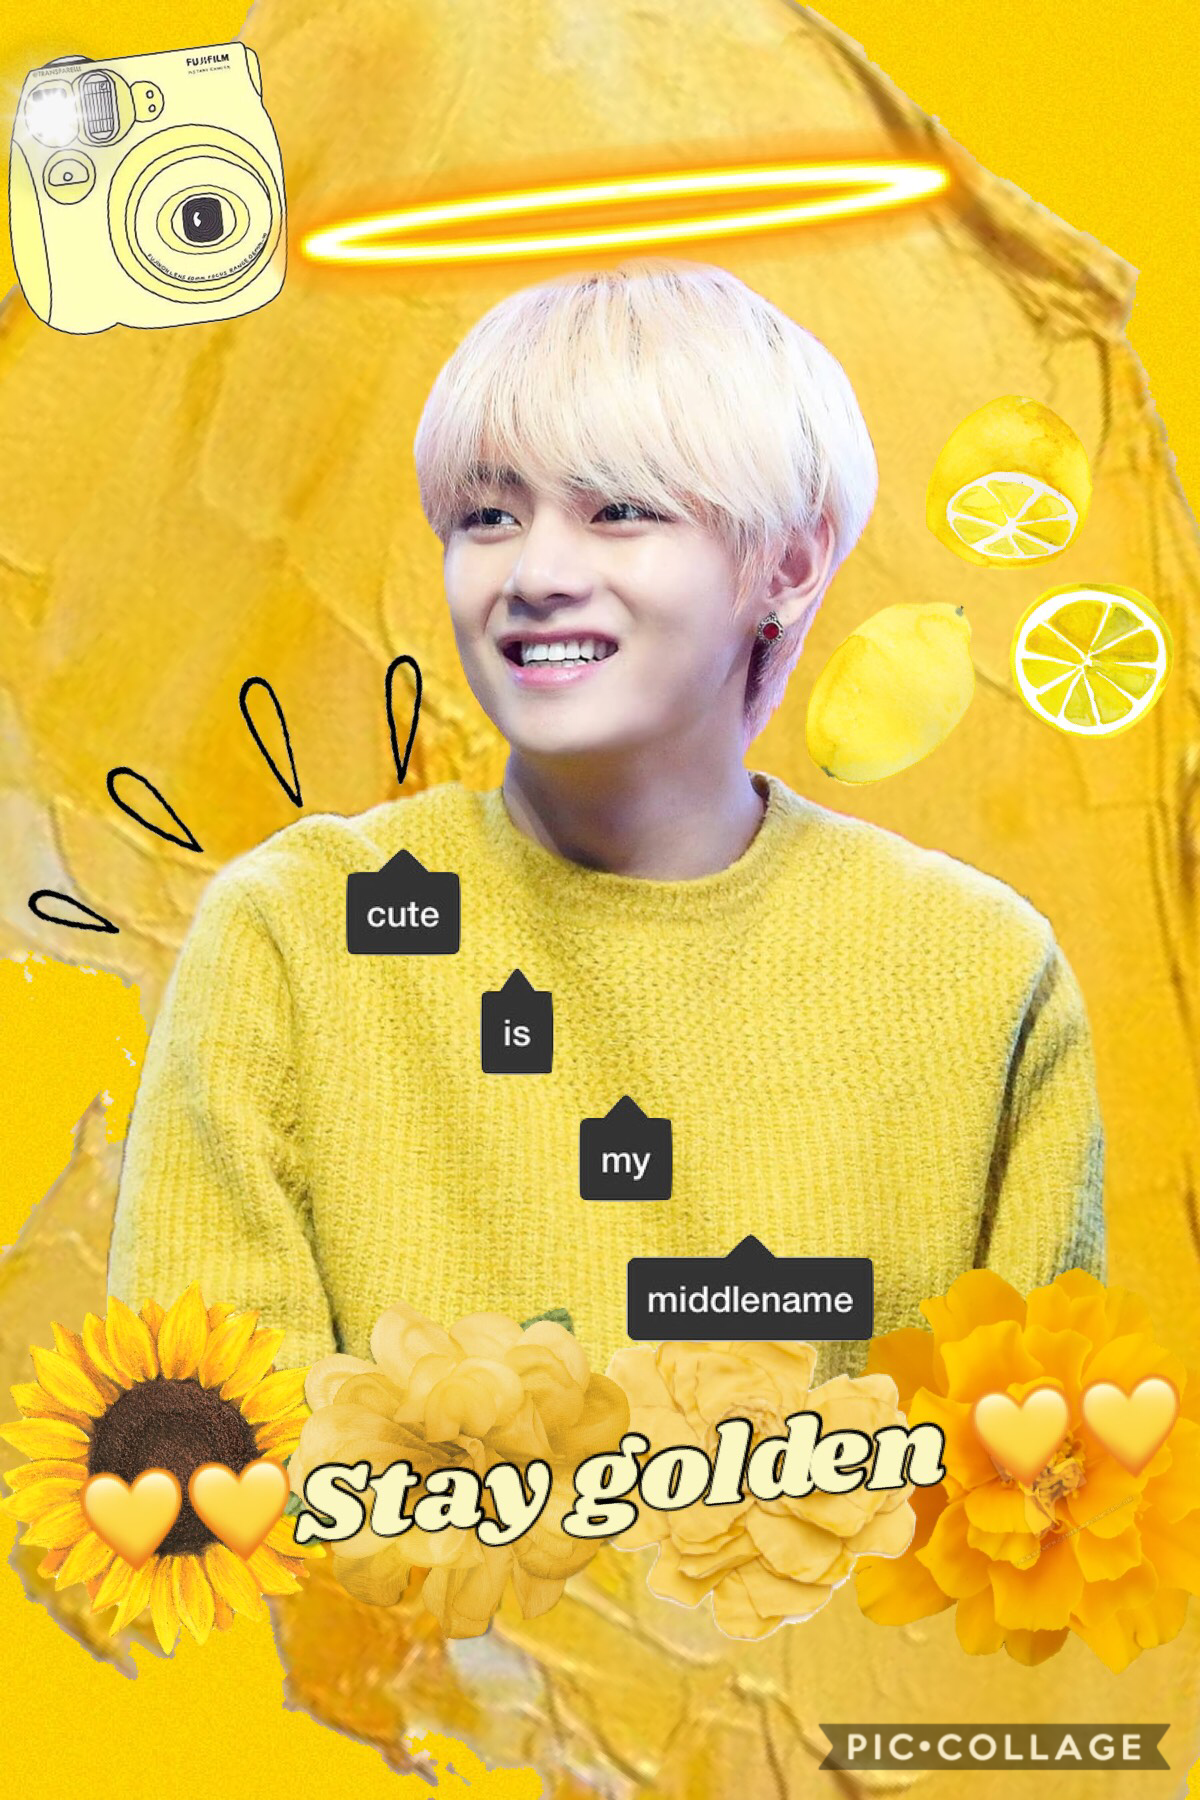 <tap>
Stay golden like tae you guys💛. 
QOTD: What is your favorite color?
AOTD: Just changed my favorite color to yellow! 🌕🌙⭐️☀️🍋💛